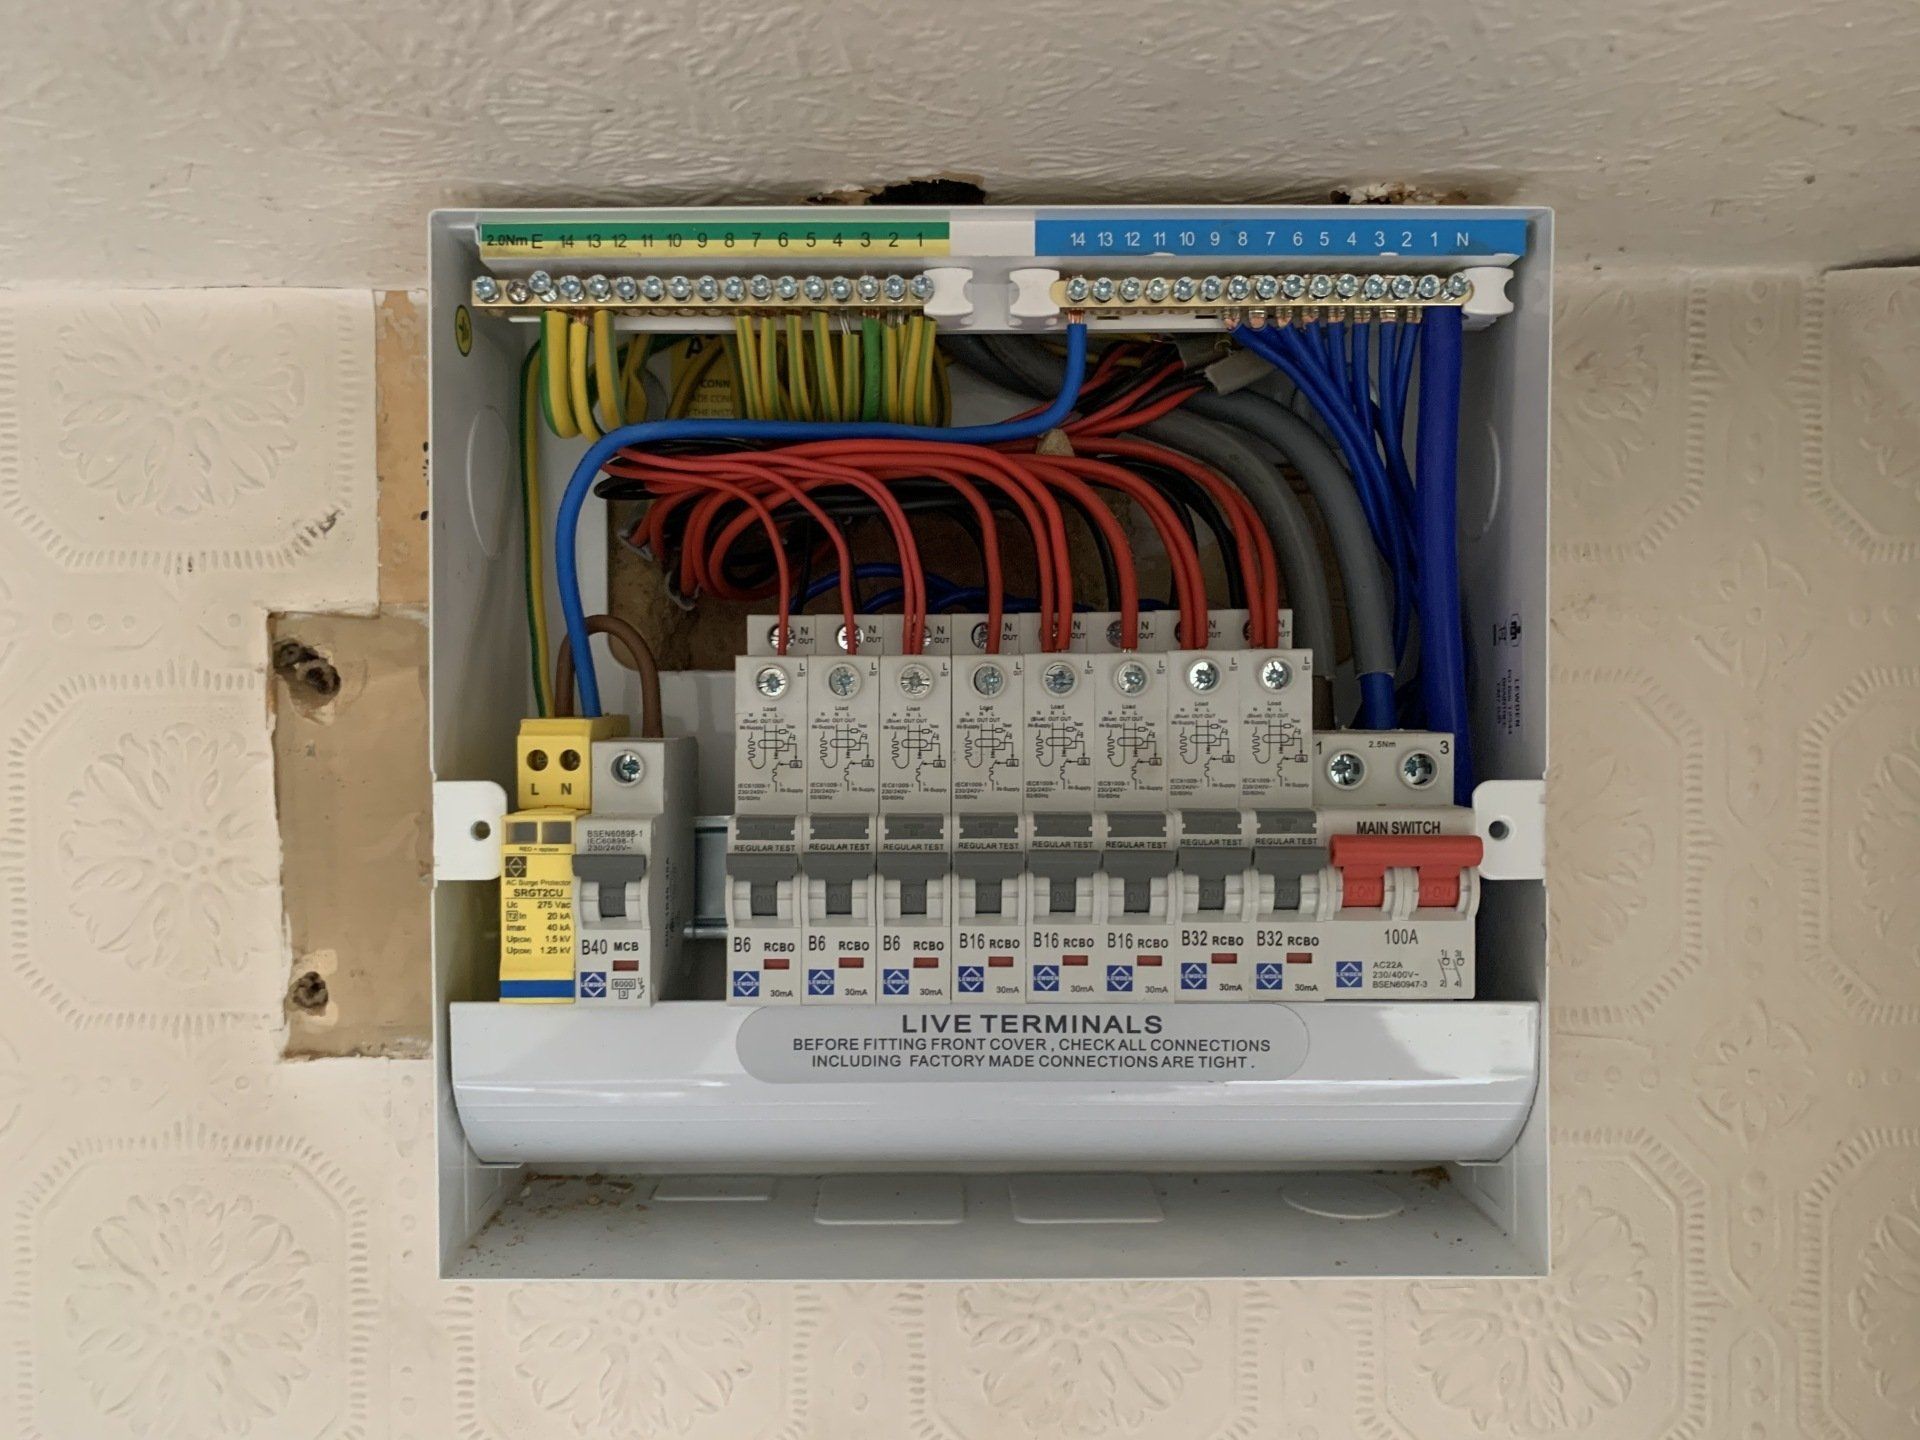 Consumer Units at Gloucester electrical